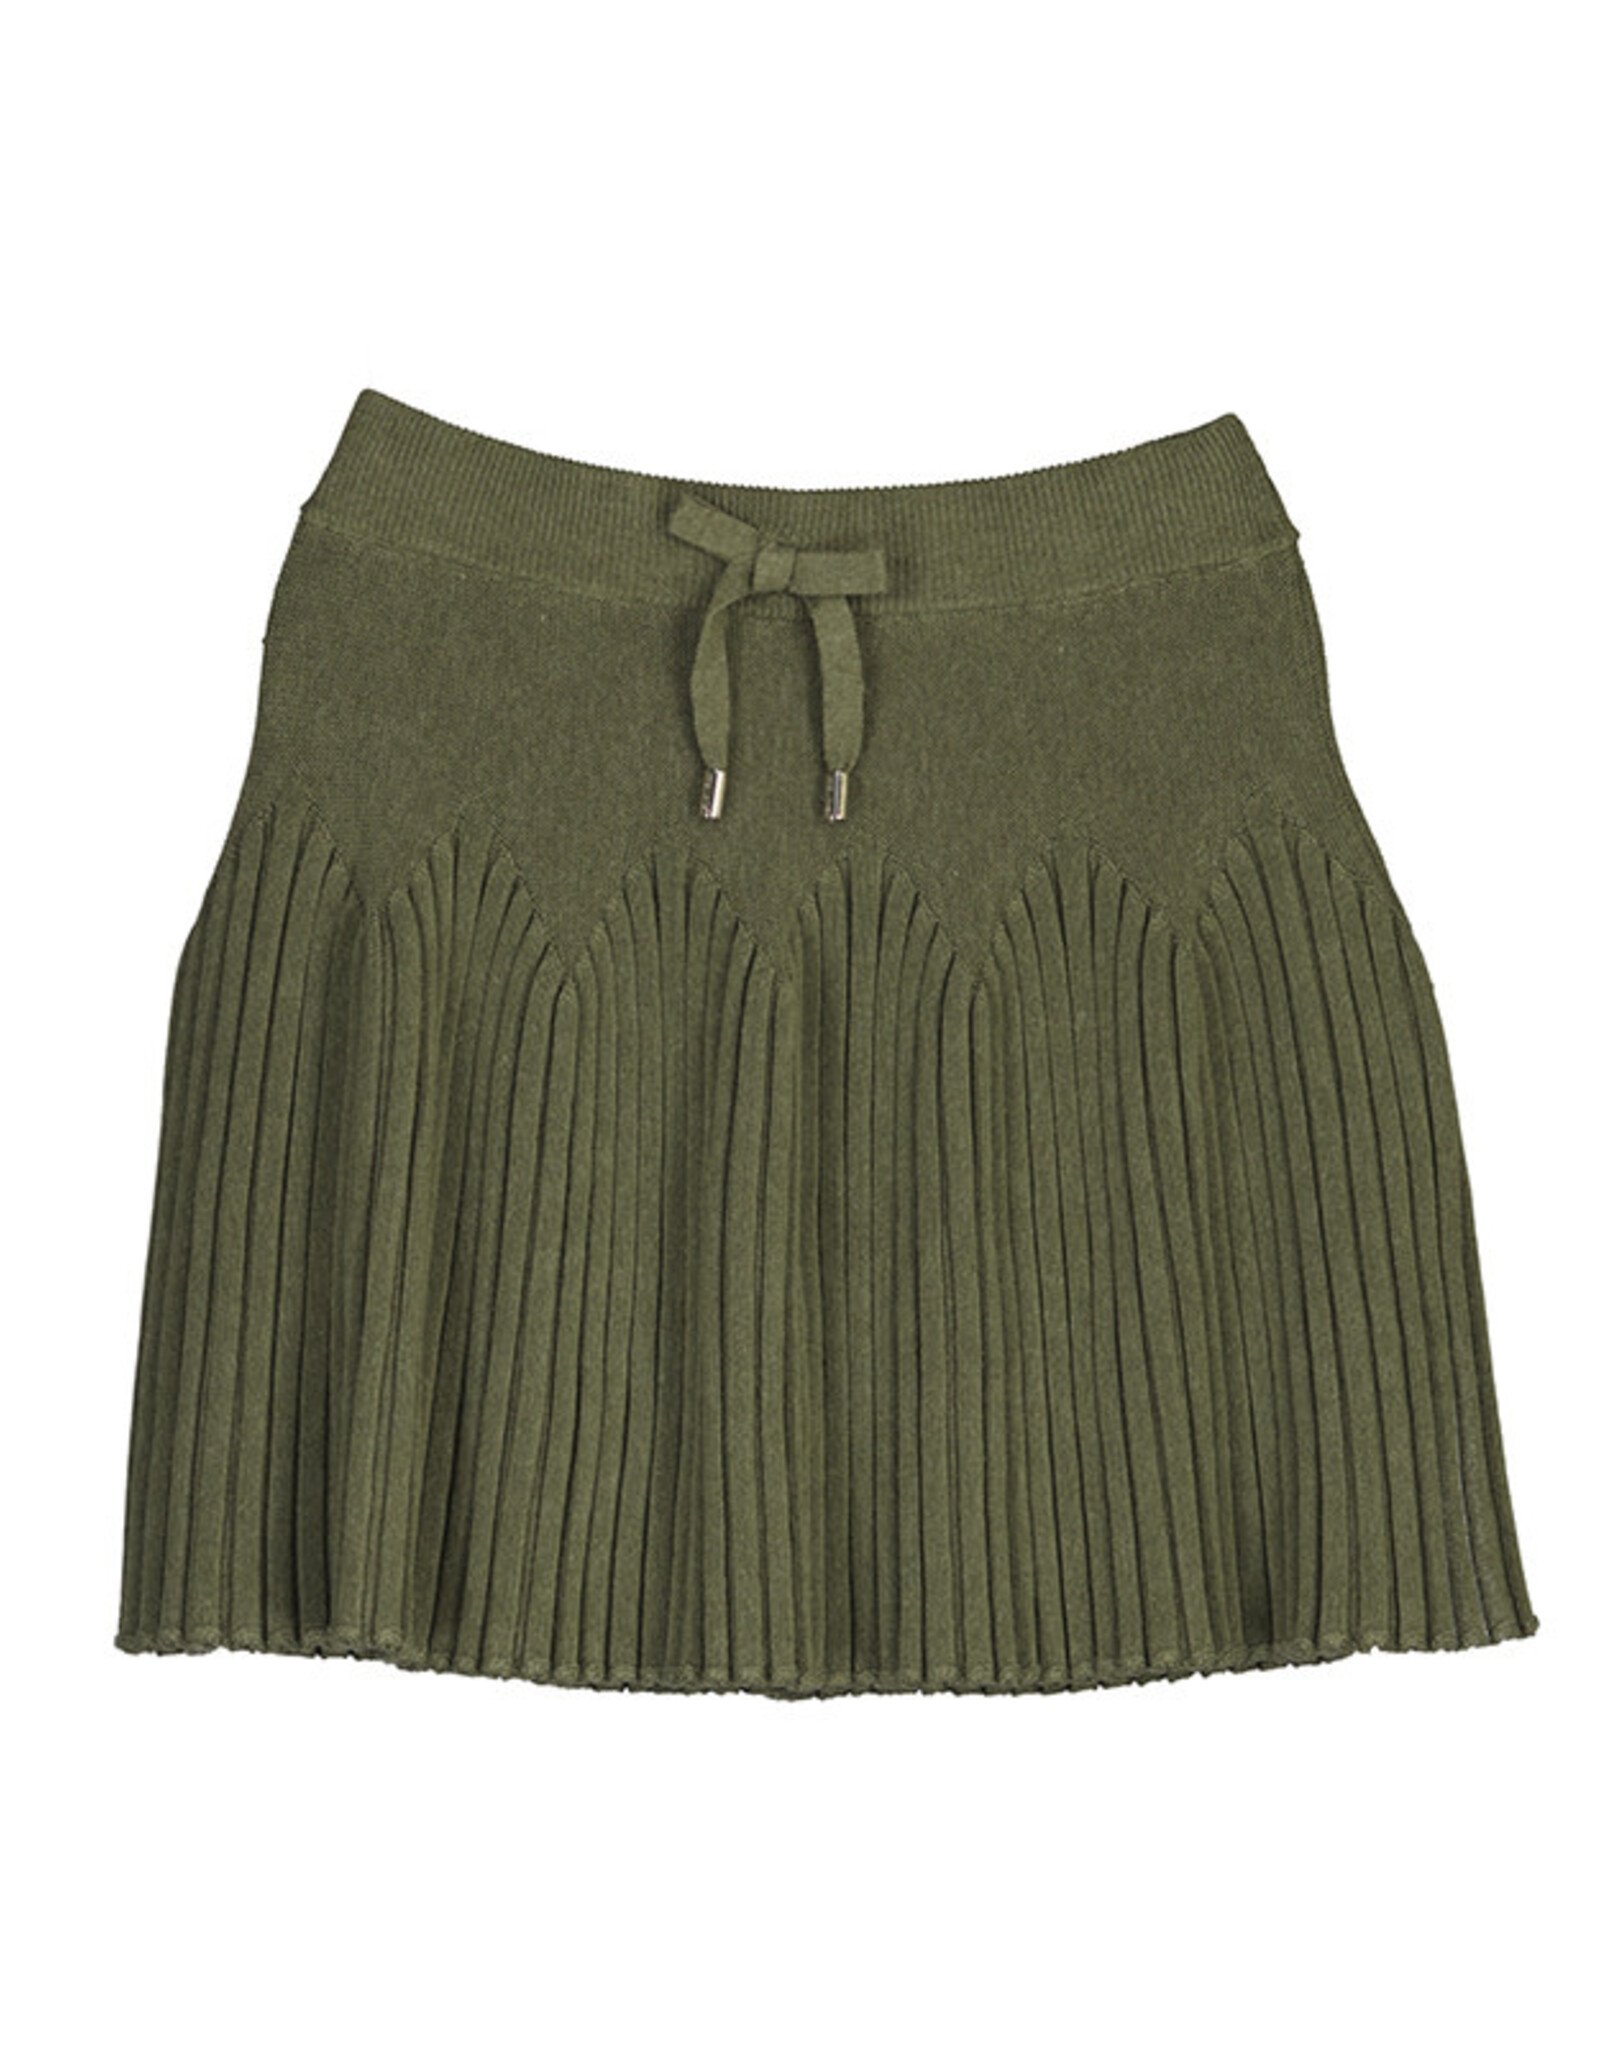 Mayoral Moss Knit Skirt